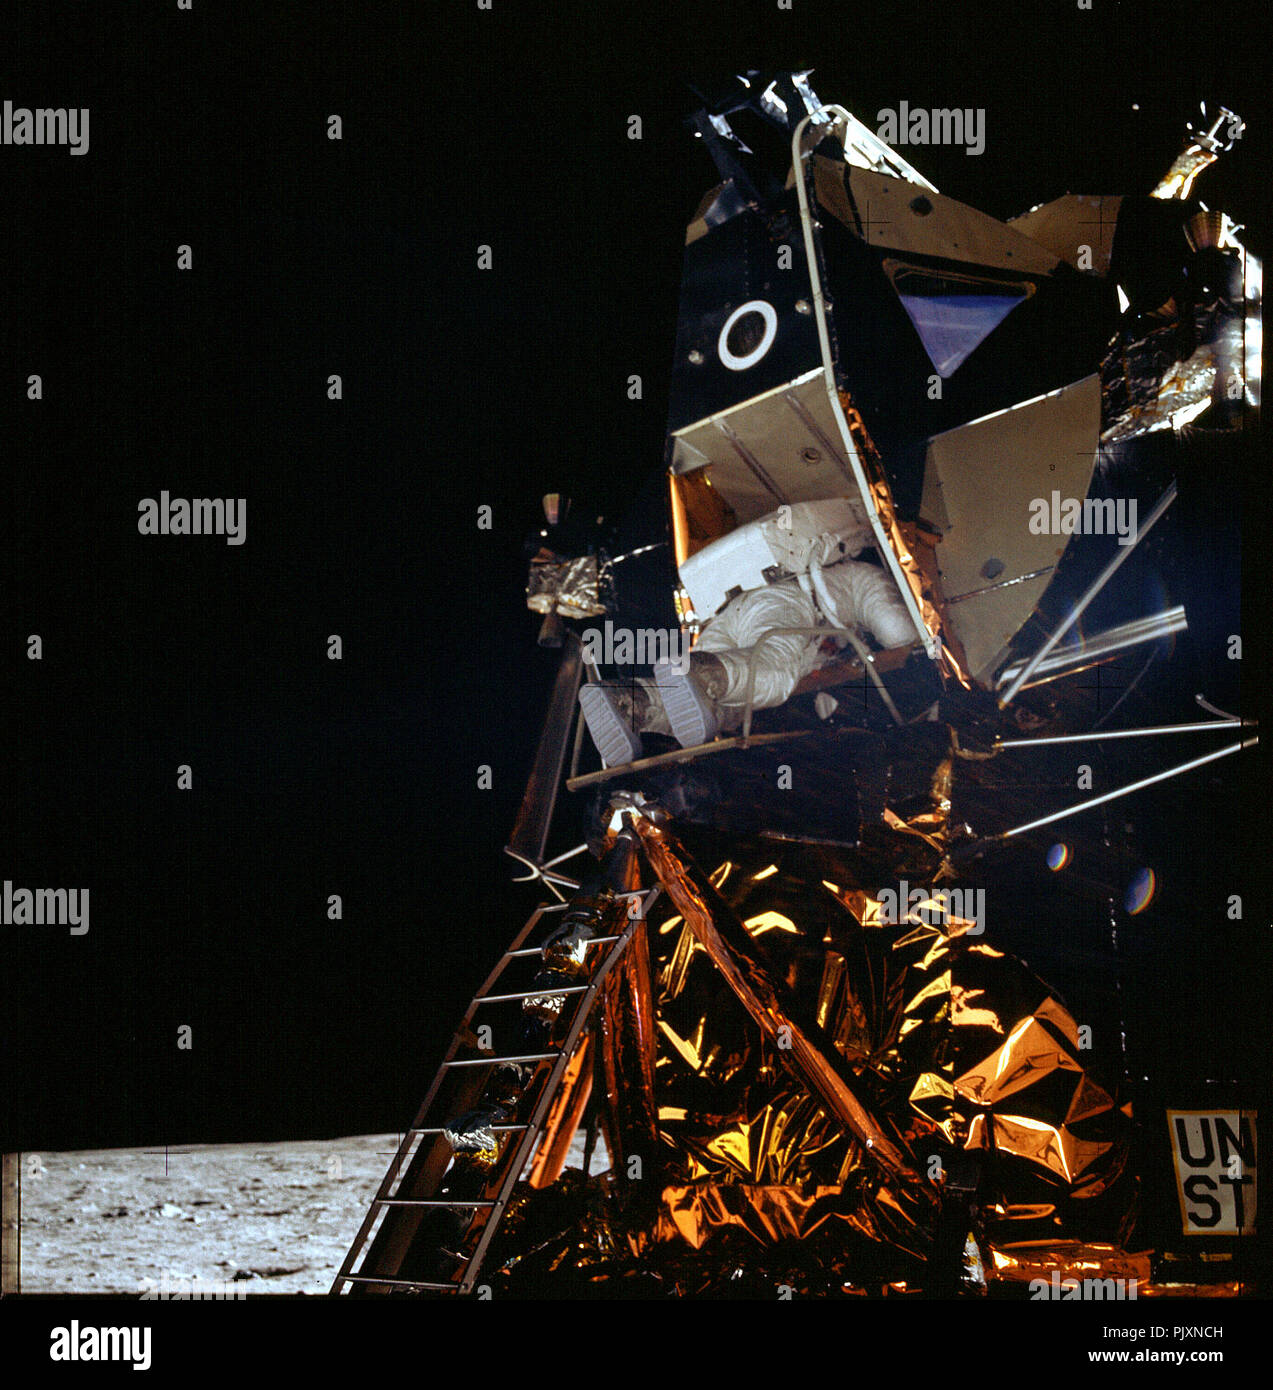 The Moon - (FILE) -- Apollo 11 Lunar Module pilot Edwin Aldrin begins backing out of the hatch to begin his walk on the Moon. Neil Armstrong, who took the first step on the Moon 19 minutes earlier, photographs the scene from the surface.  Credit: NASA via CNP /MediaPunch Stock Photo